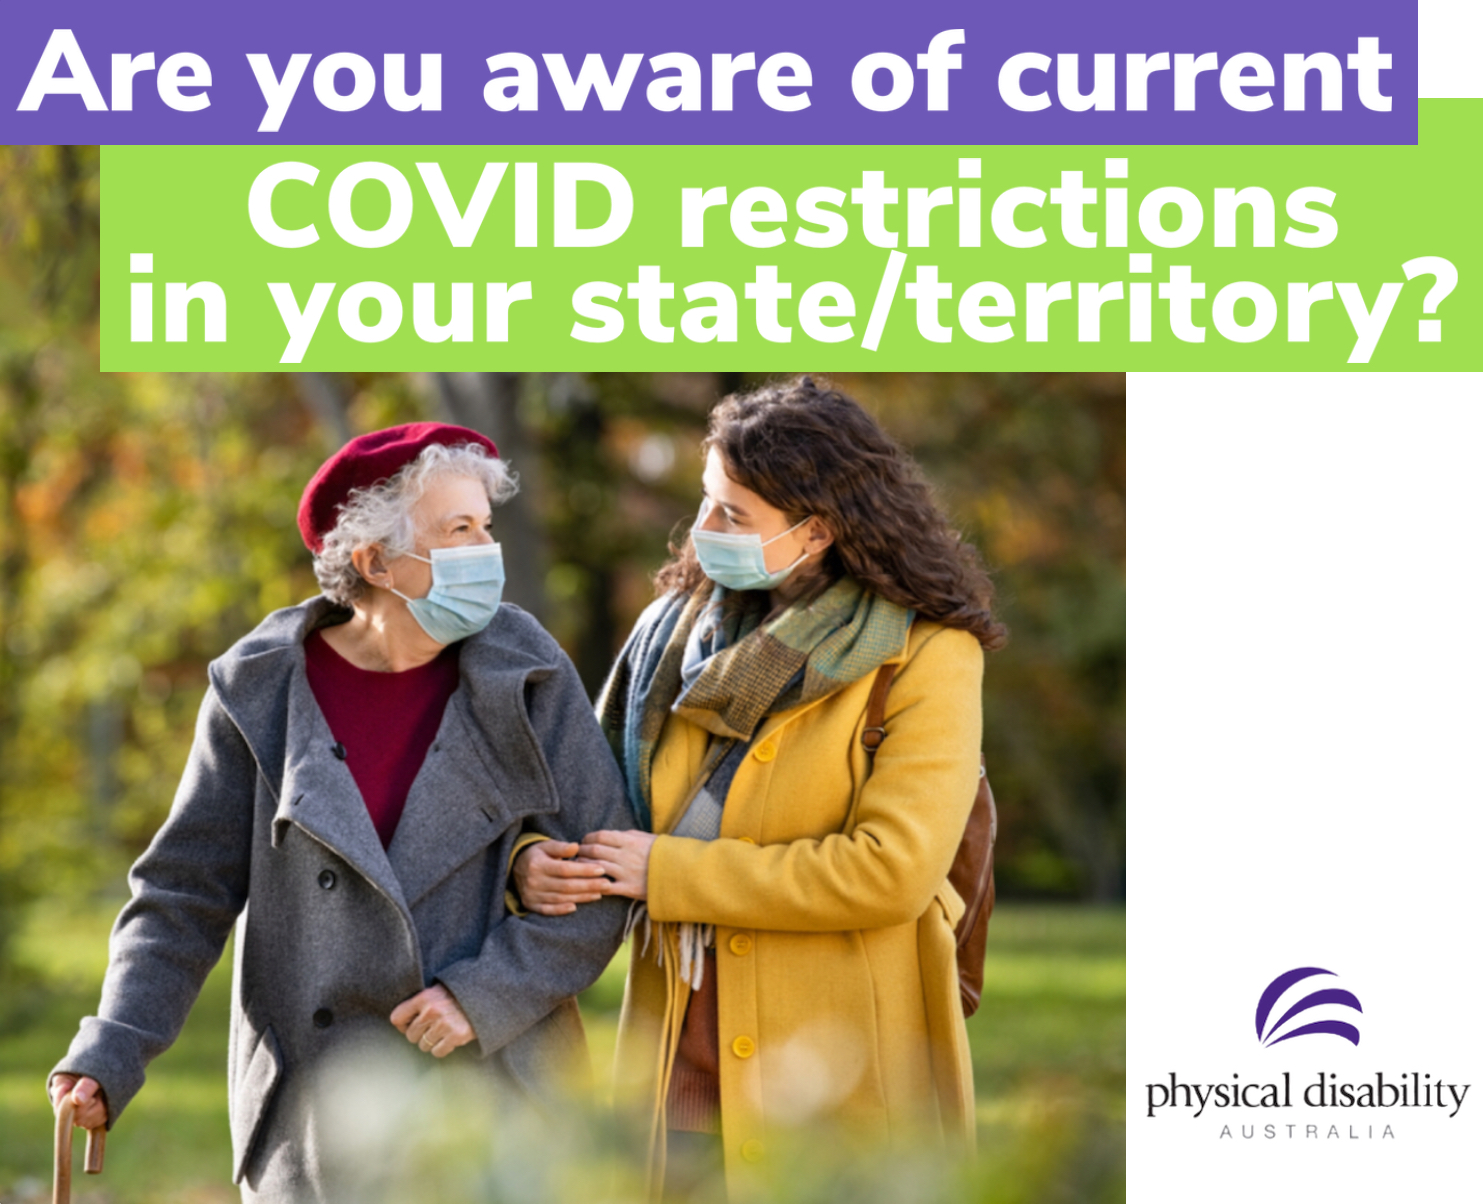 Keep up to date with the current Australian COVID